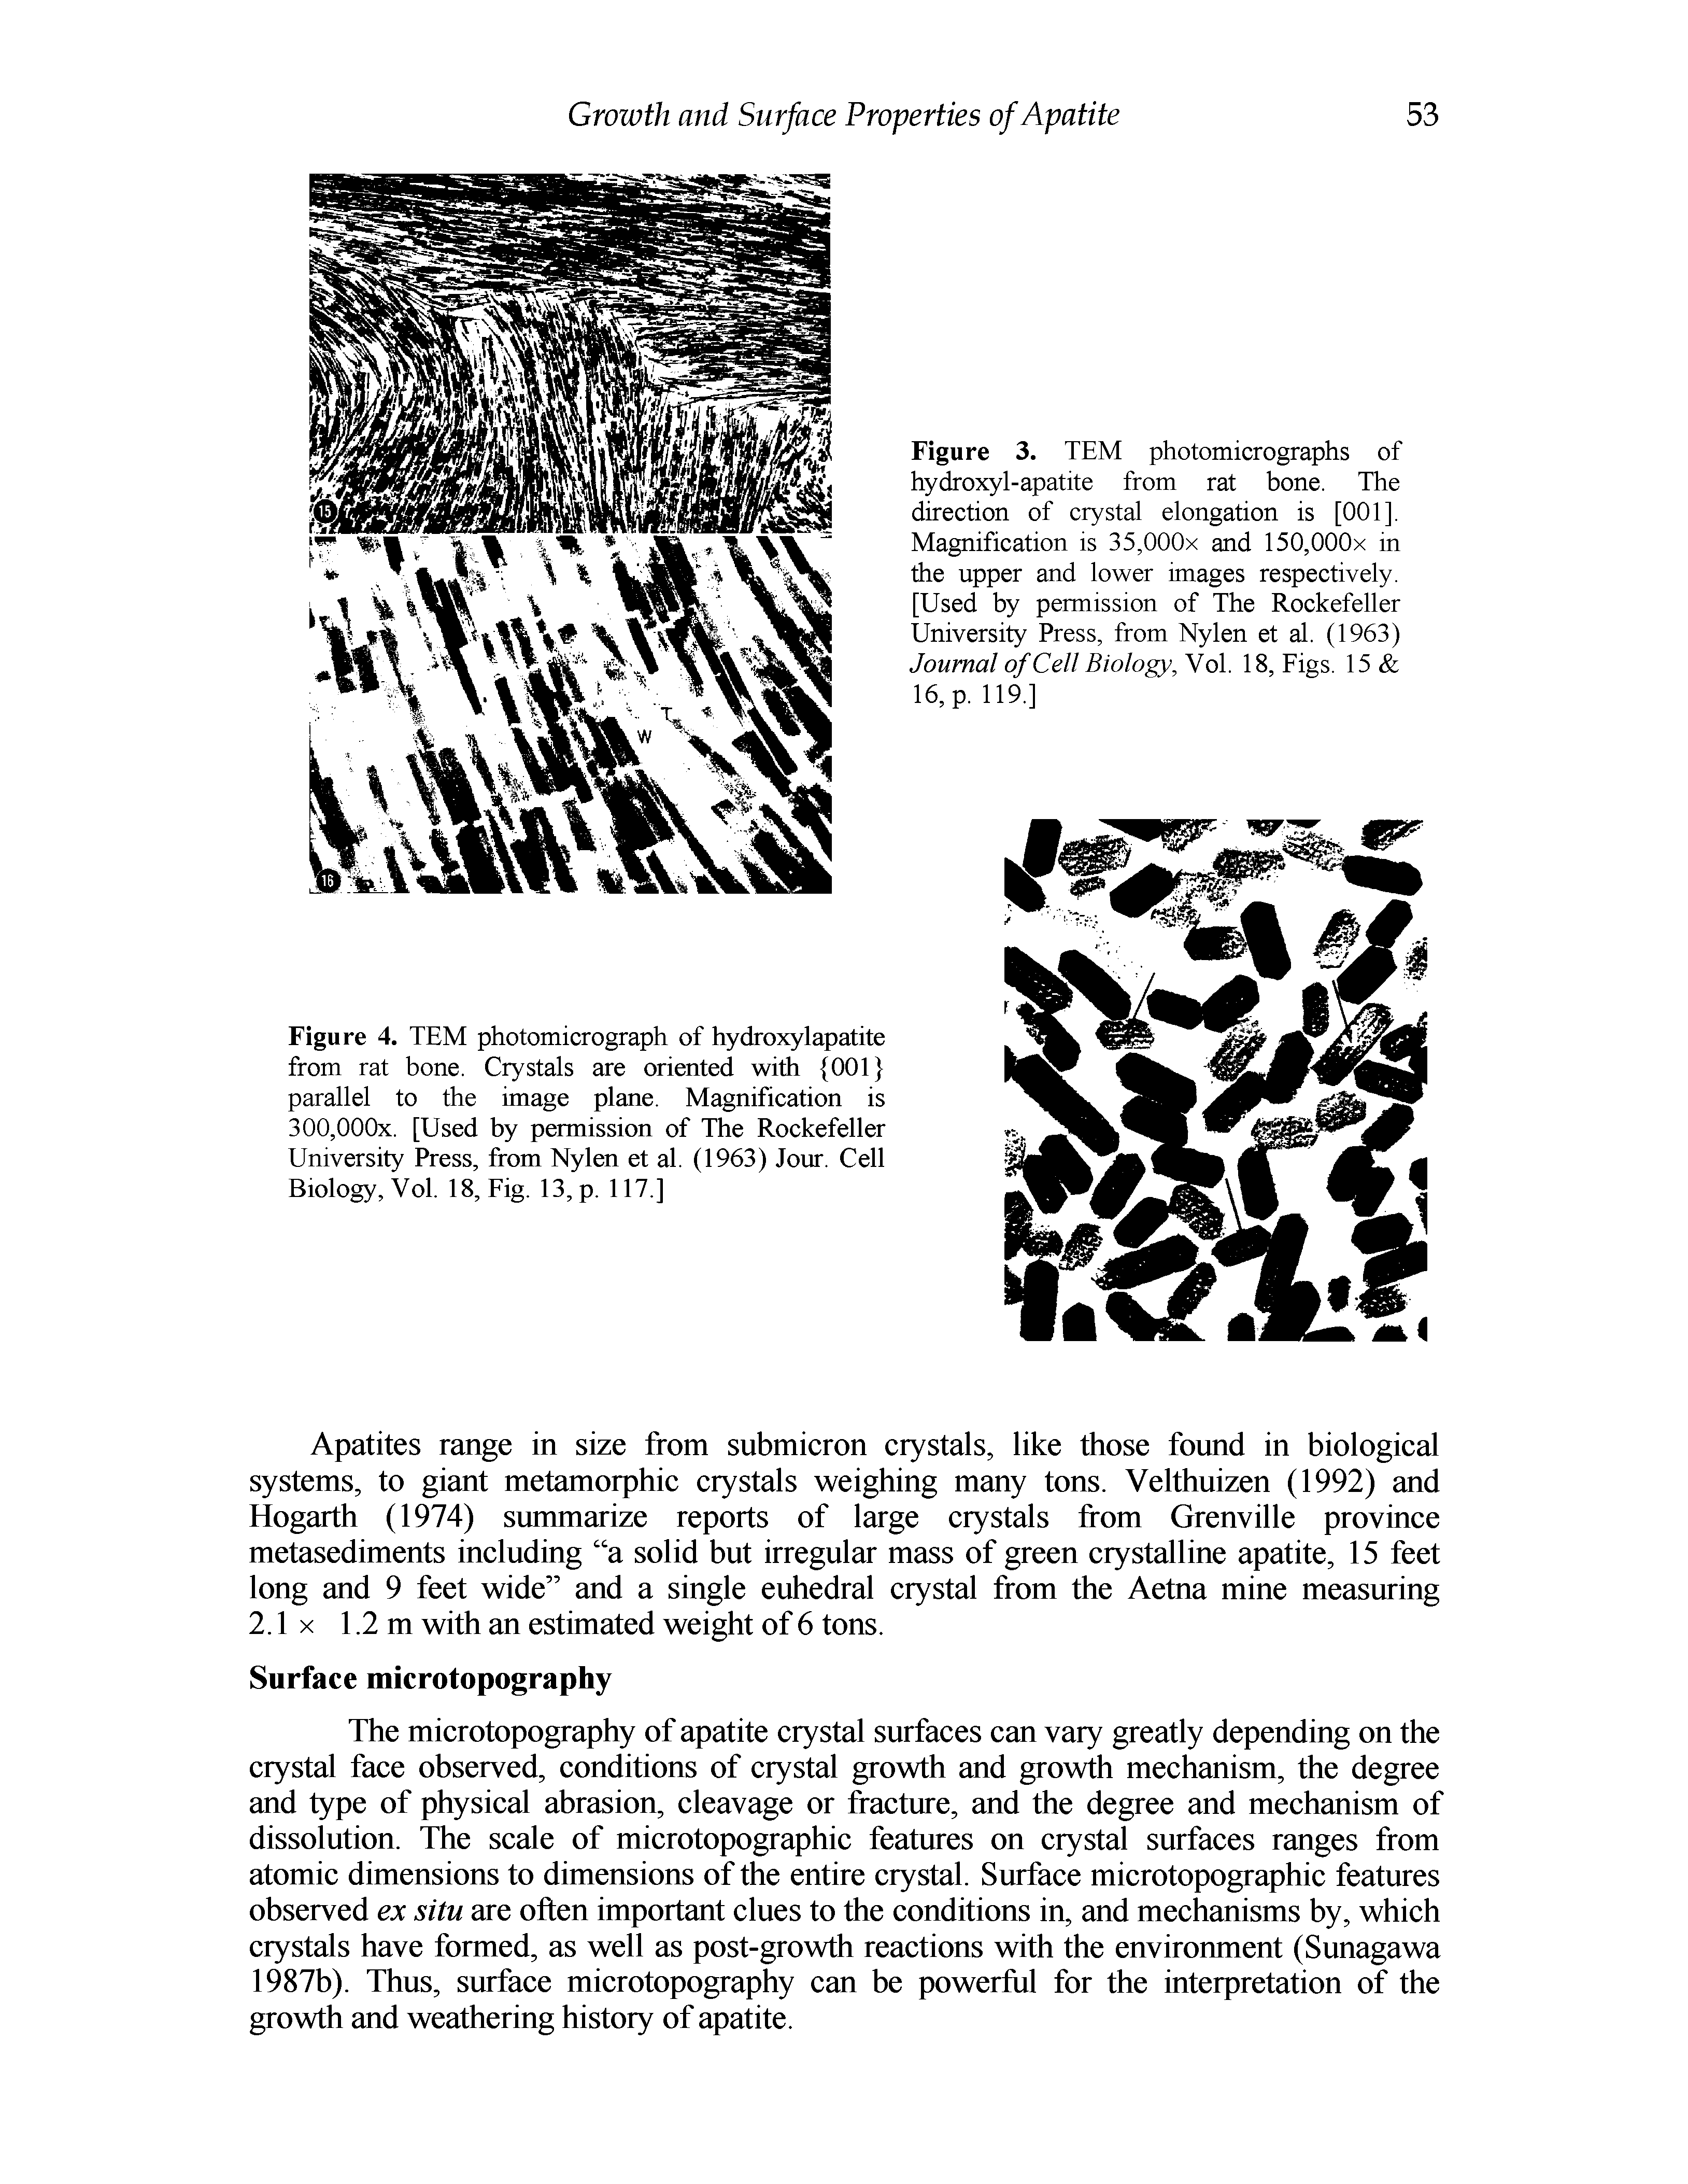 Figure 3. TEM photomicrographs of hydroxyl-apatite from rat bone. The direction of crystal elongation is [001], Magnification is 35,000x and 150,000x in the upper and lower images respectively. [Used by permission of The Rockefeller University Press, from Nylen et al. (1963) Journal of Cell Biology, Vol. 18, Figs. 15 16, p. 119.]...